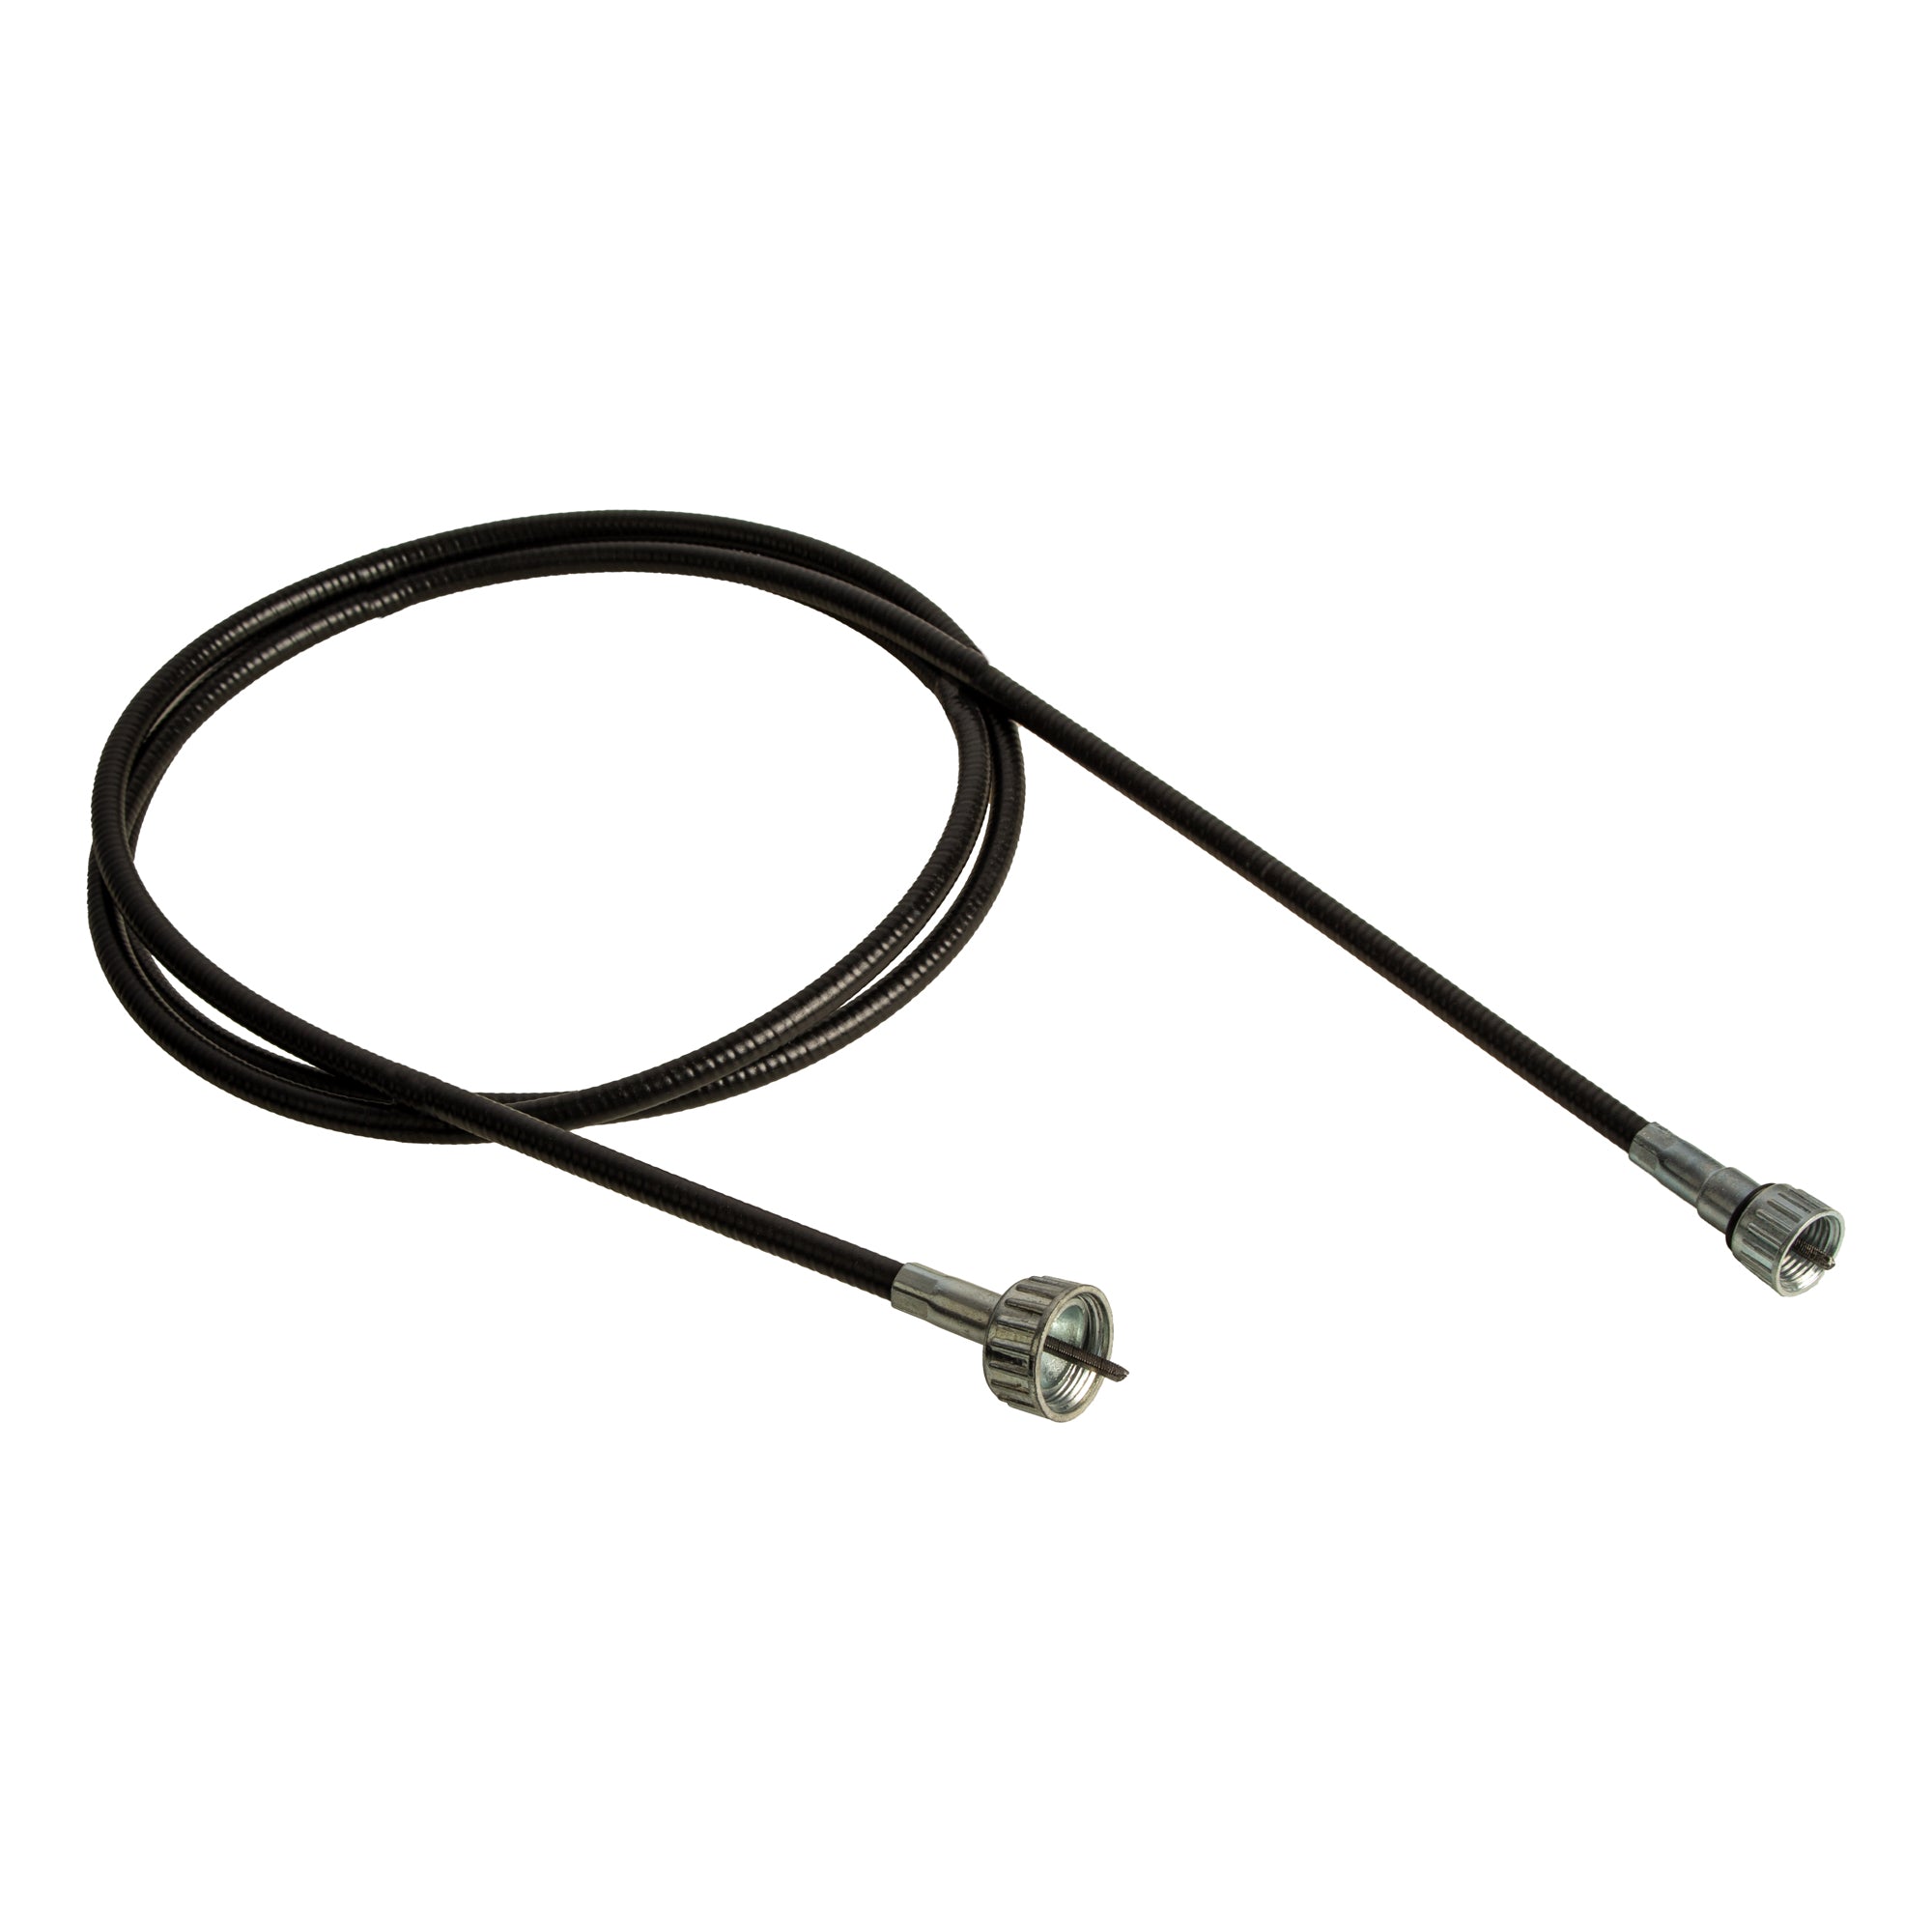 Tachometer Cable Replacement for MASSEY FERGUSON 2620 2625 2680 2685 3039521M91